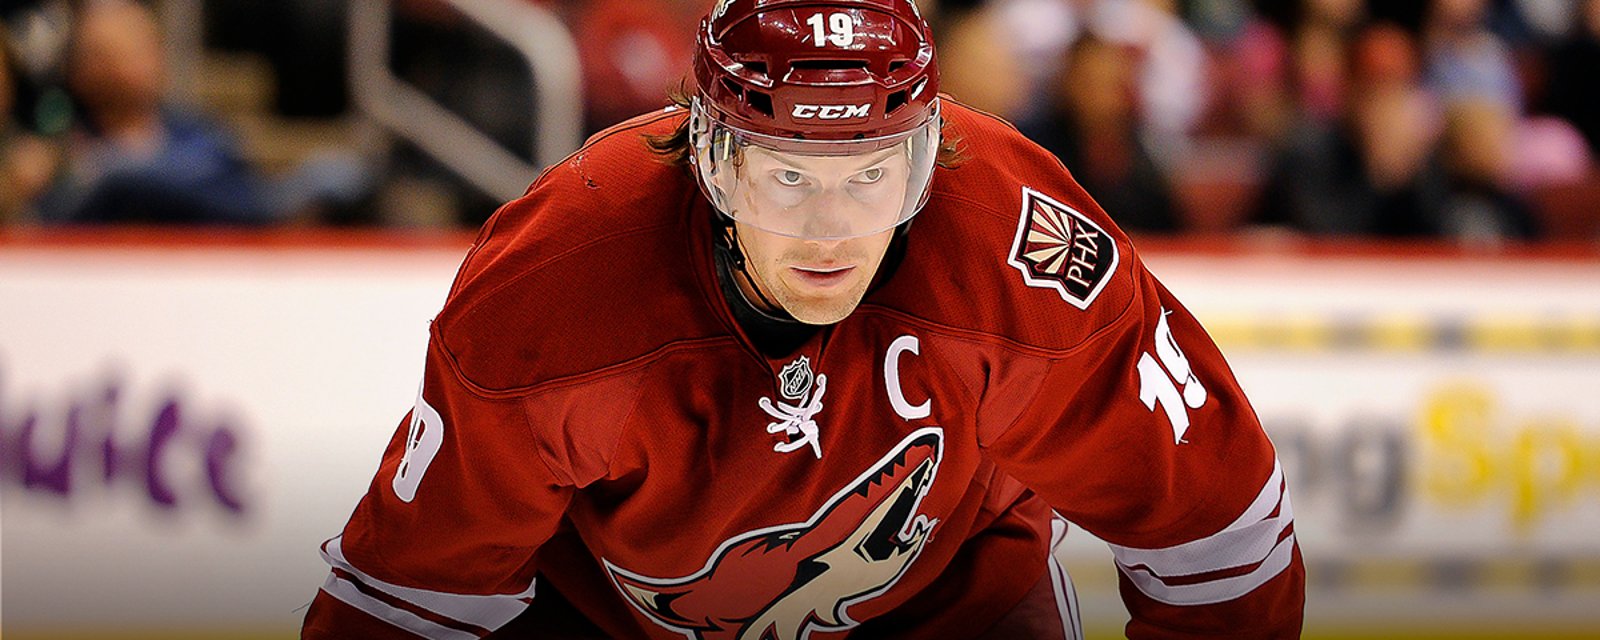 Must See: The absolute best of Shane Doan